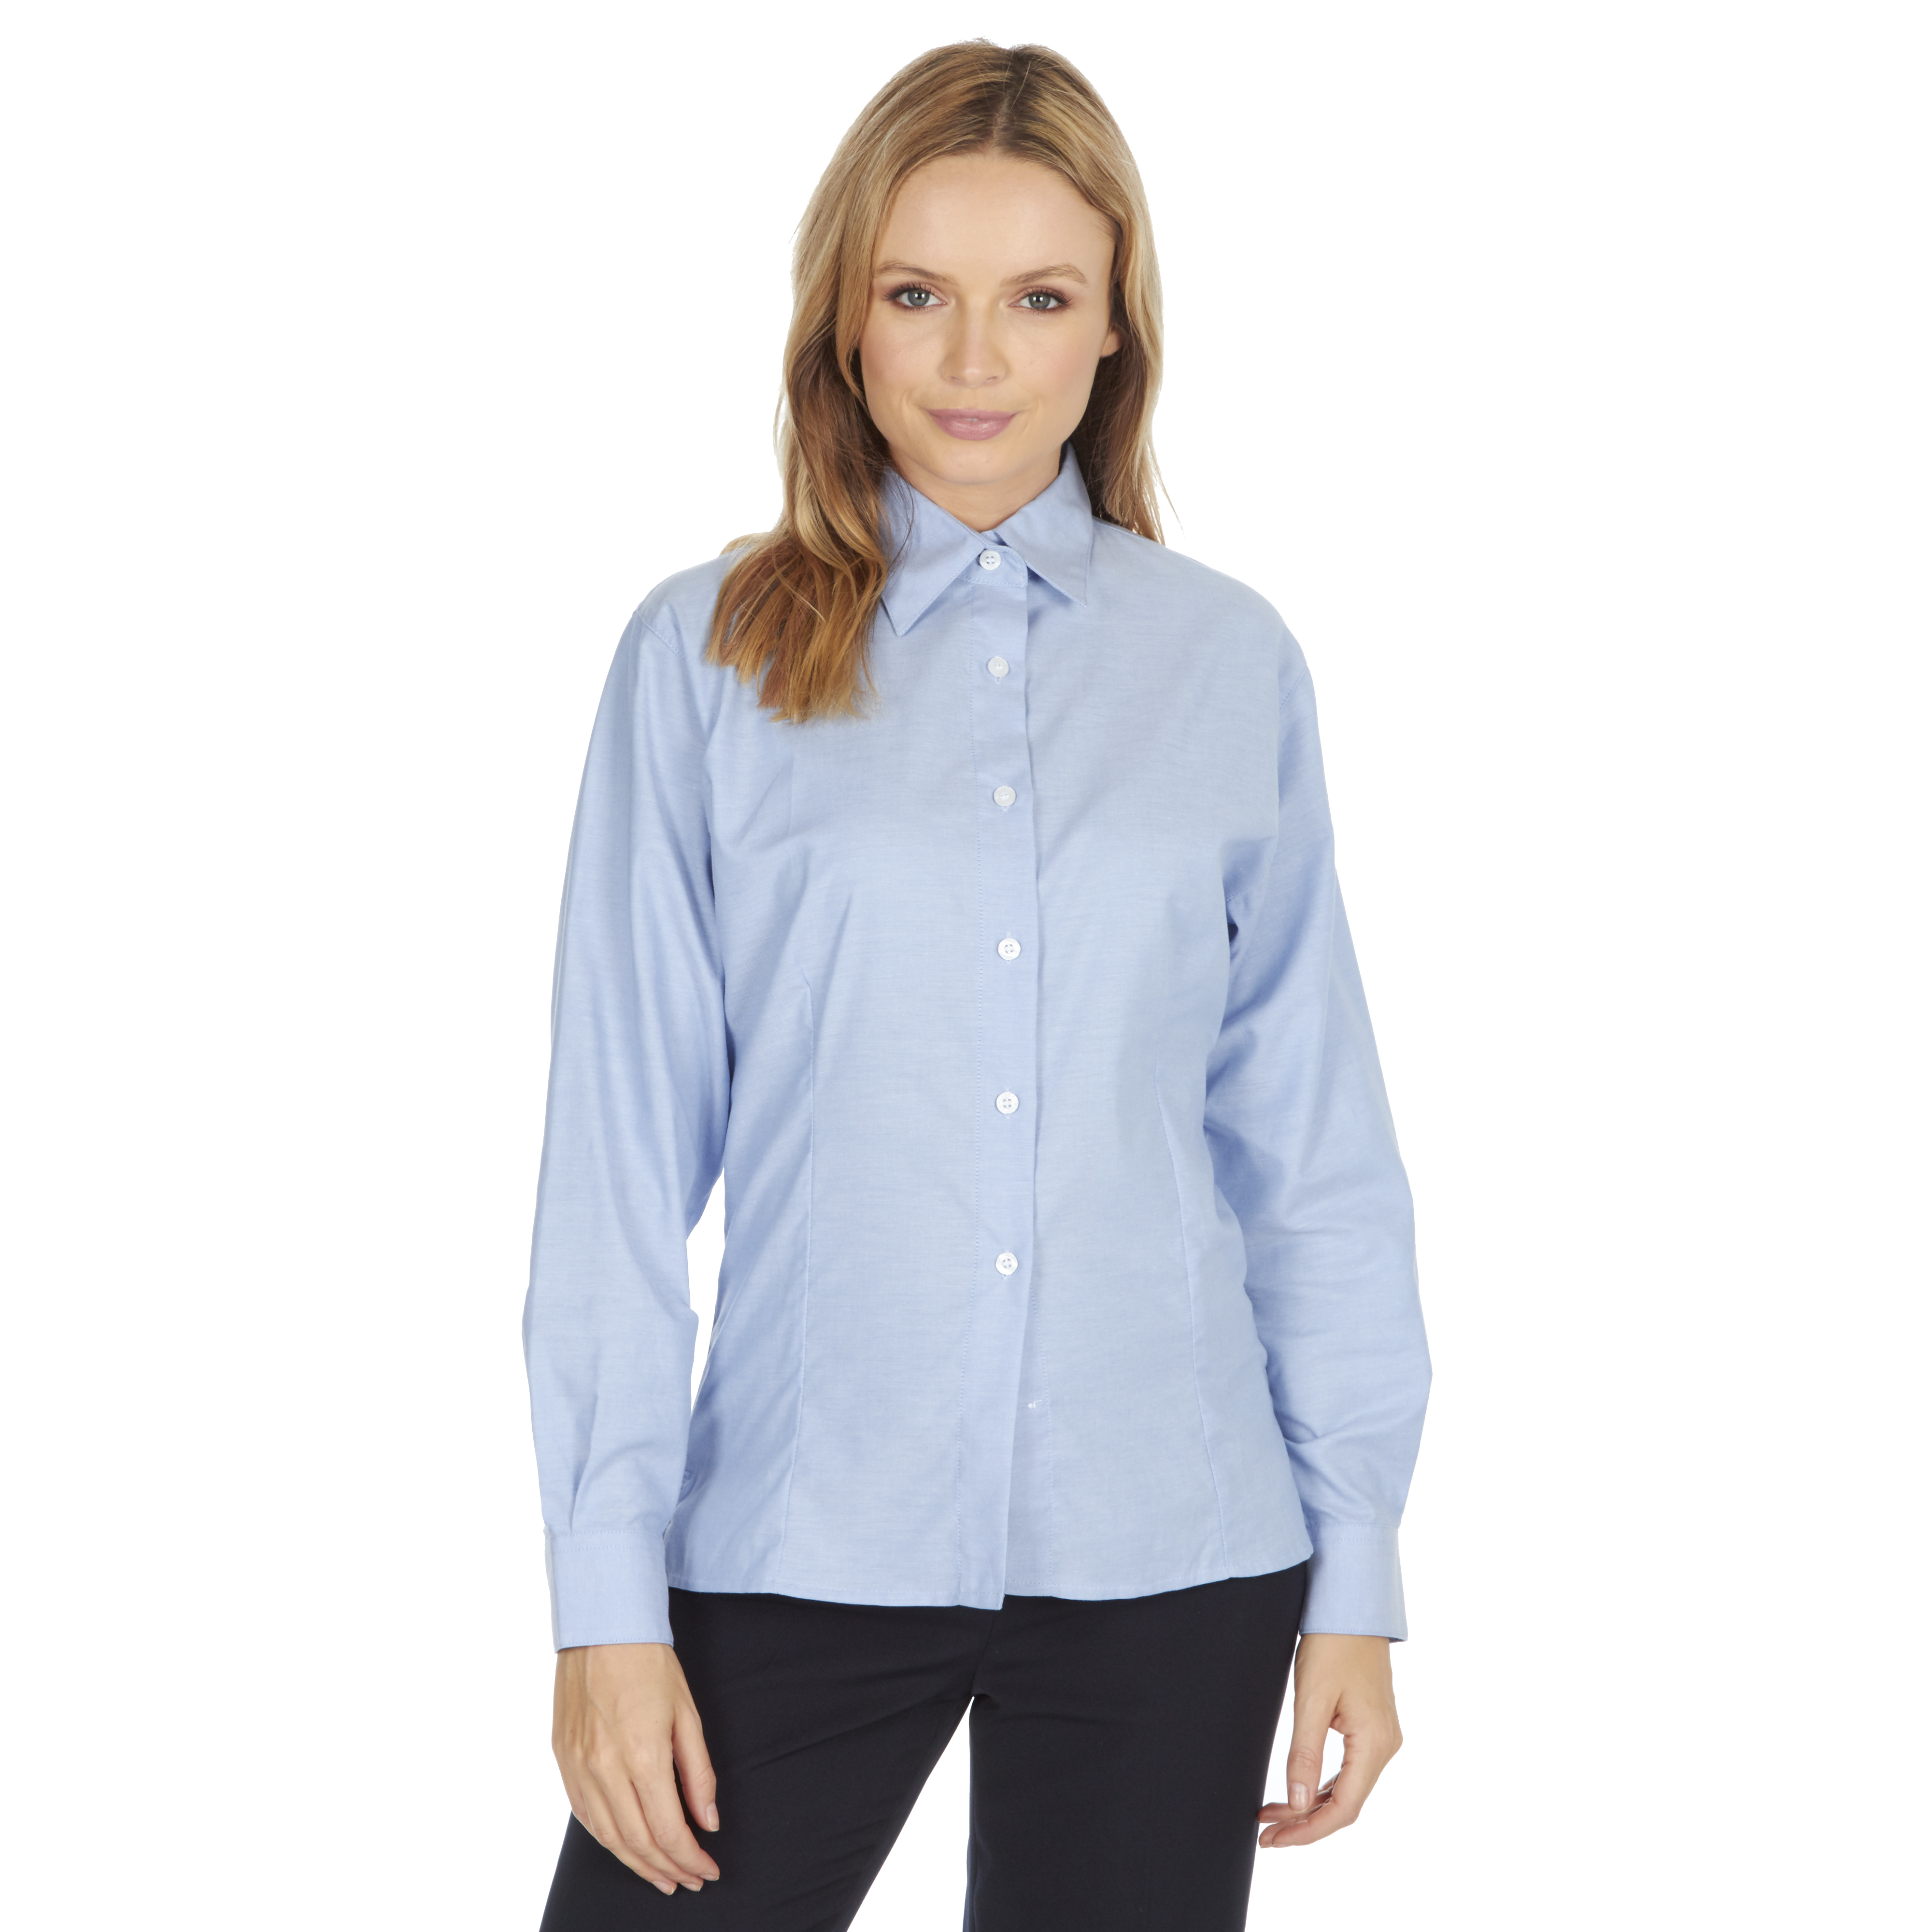 LADIES OXFORD BLOUSE CO-OPERATIVE CLOTHING FEMALE SMART OFFICE CORPORATE SHIRT 